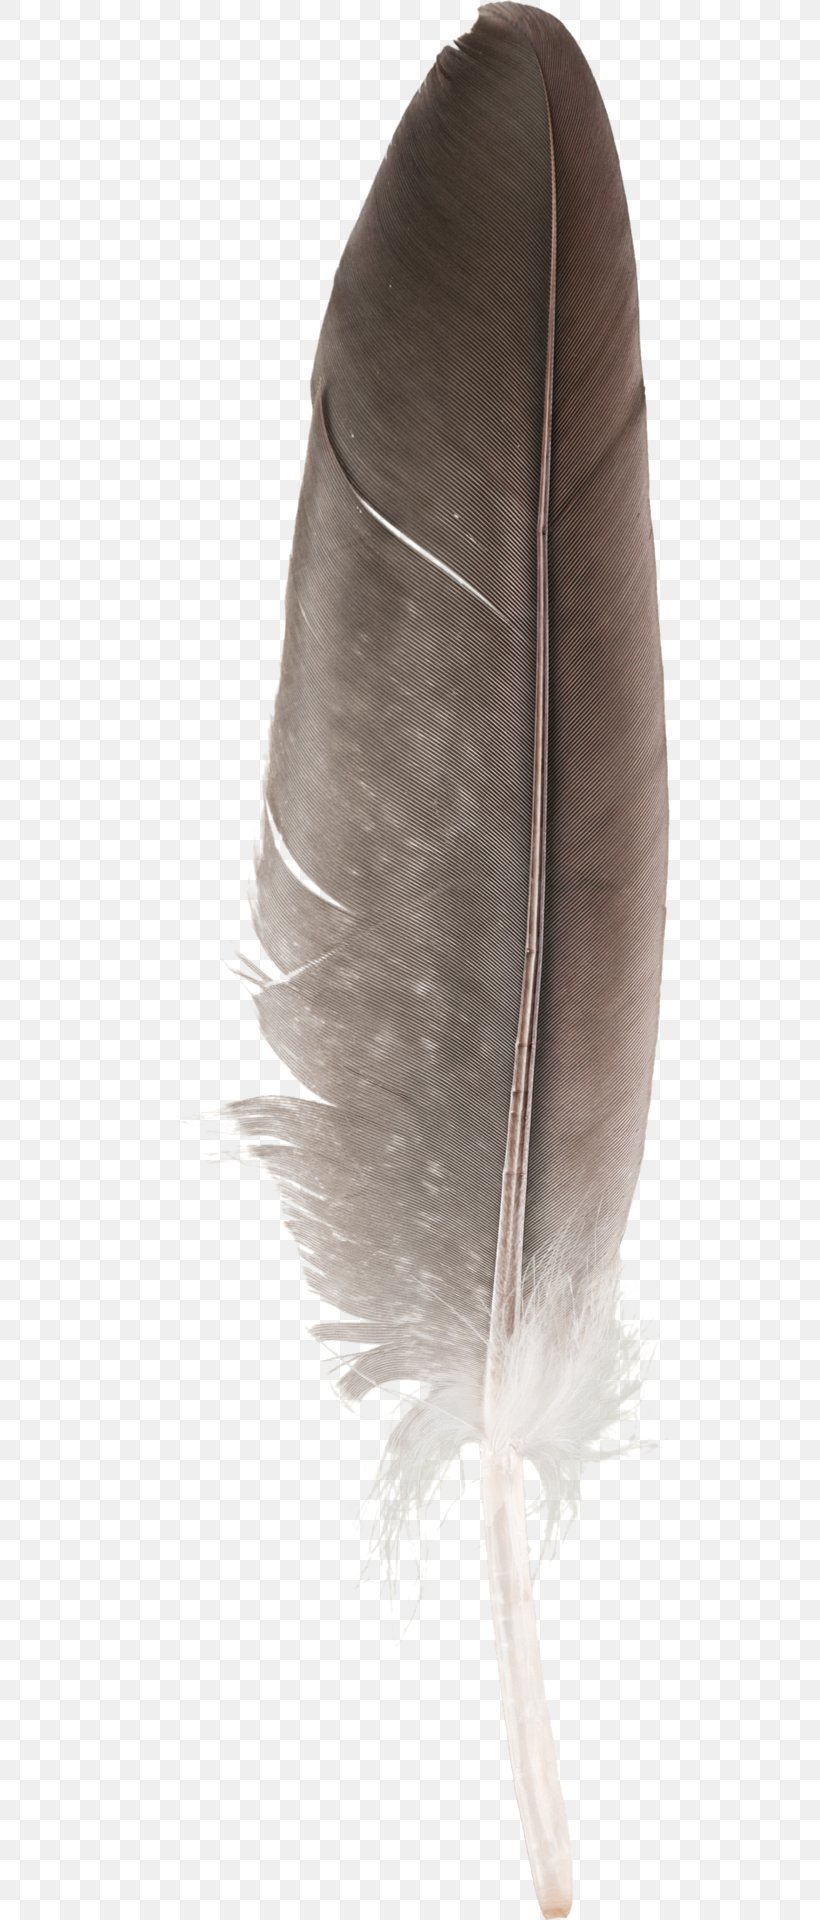 Cockatiel Bird Moulting Pet Pin Feather, PNG, 568x1920px, Cockatiel, Bird, Bird Feeders, Building, Feather Download Free